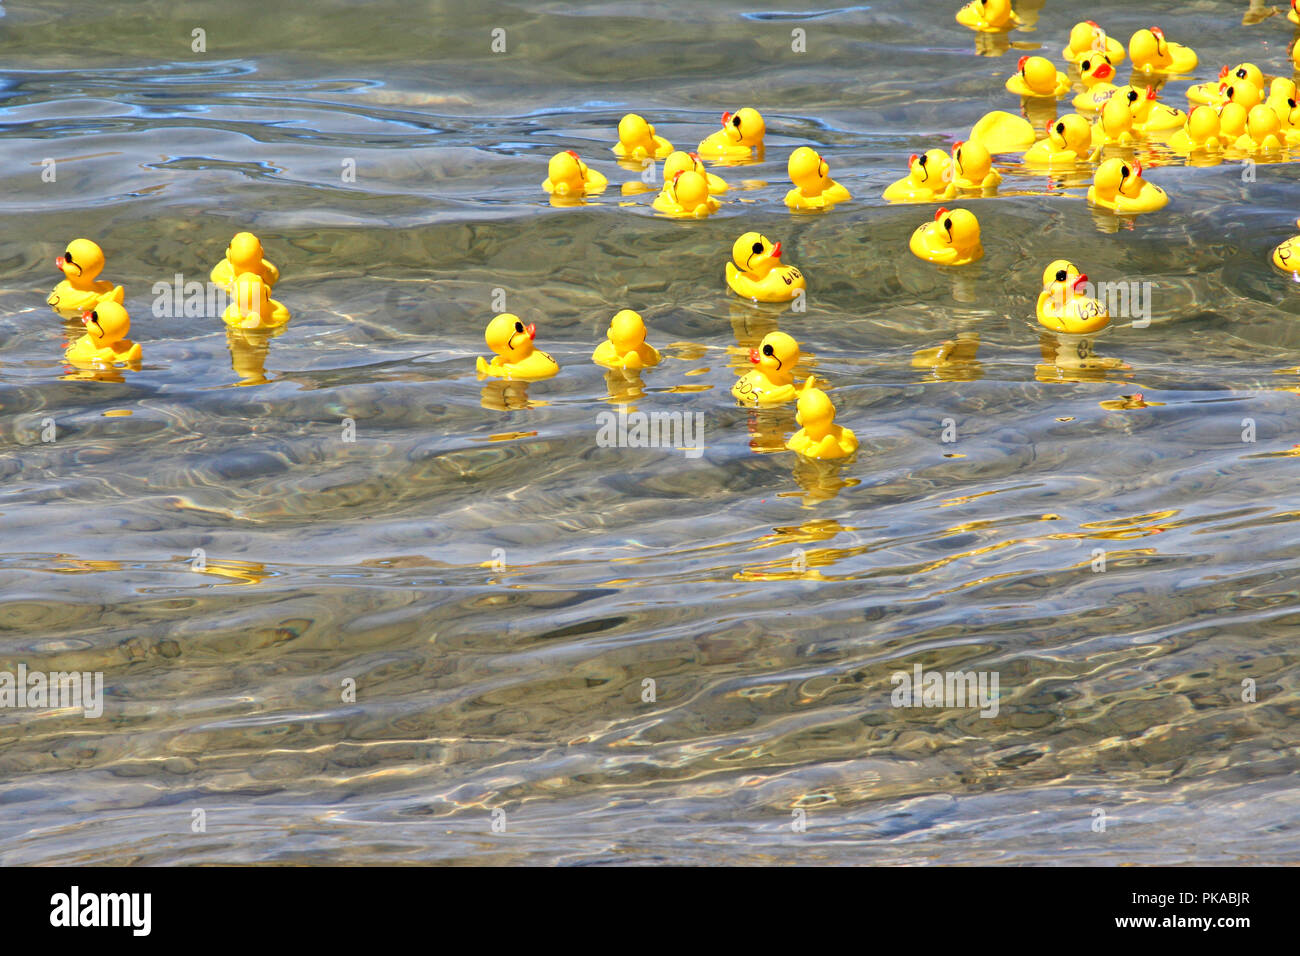 Scattered yellow rubber duckies on clear water Stock Photo